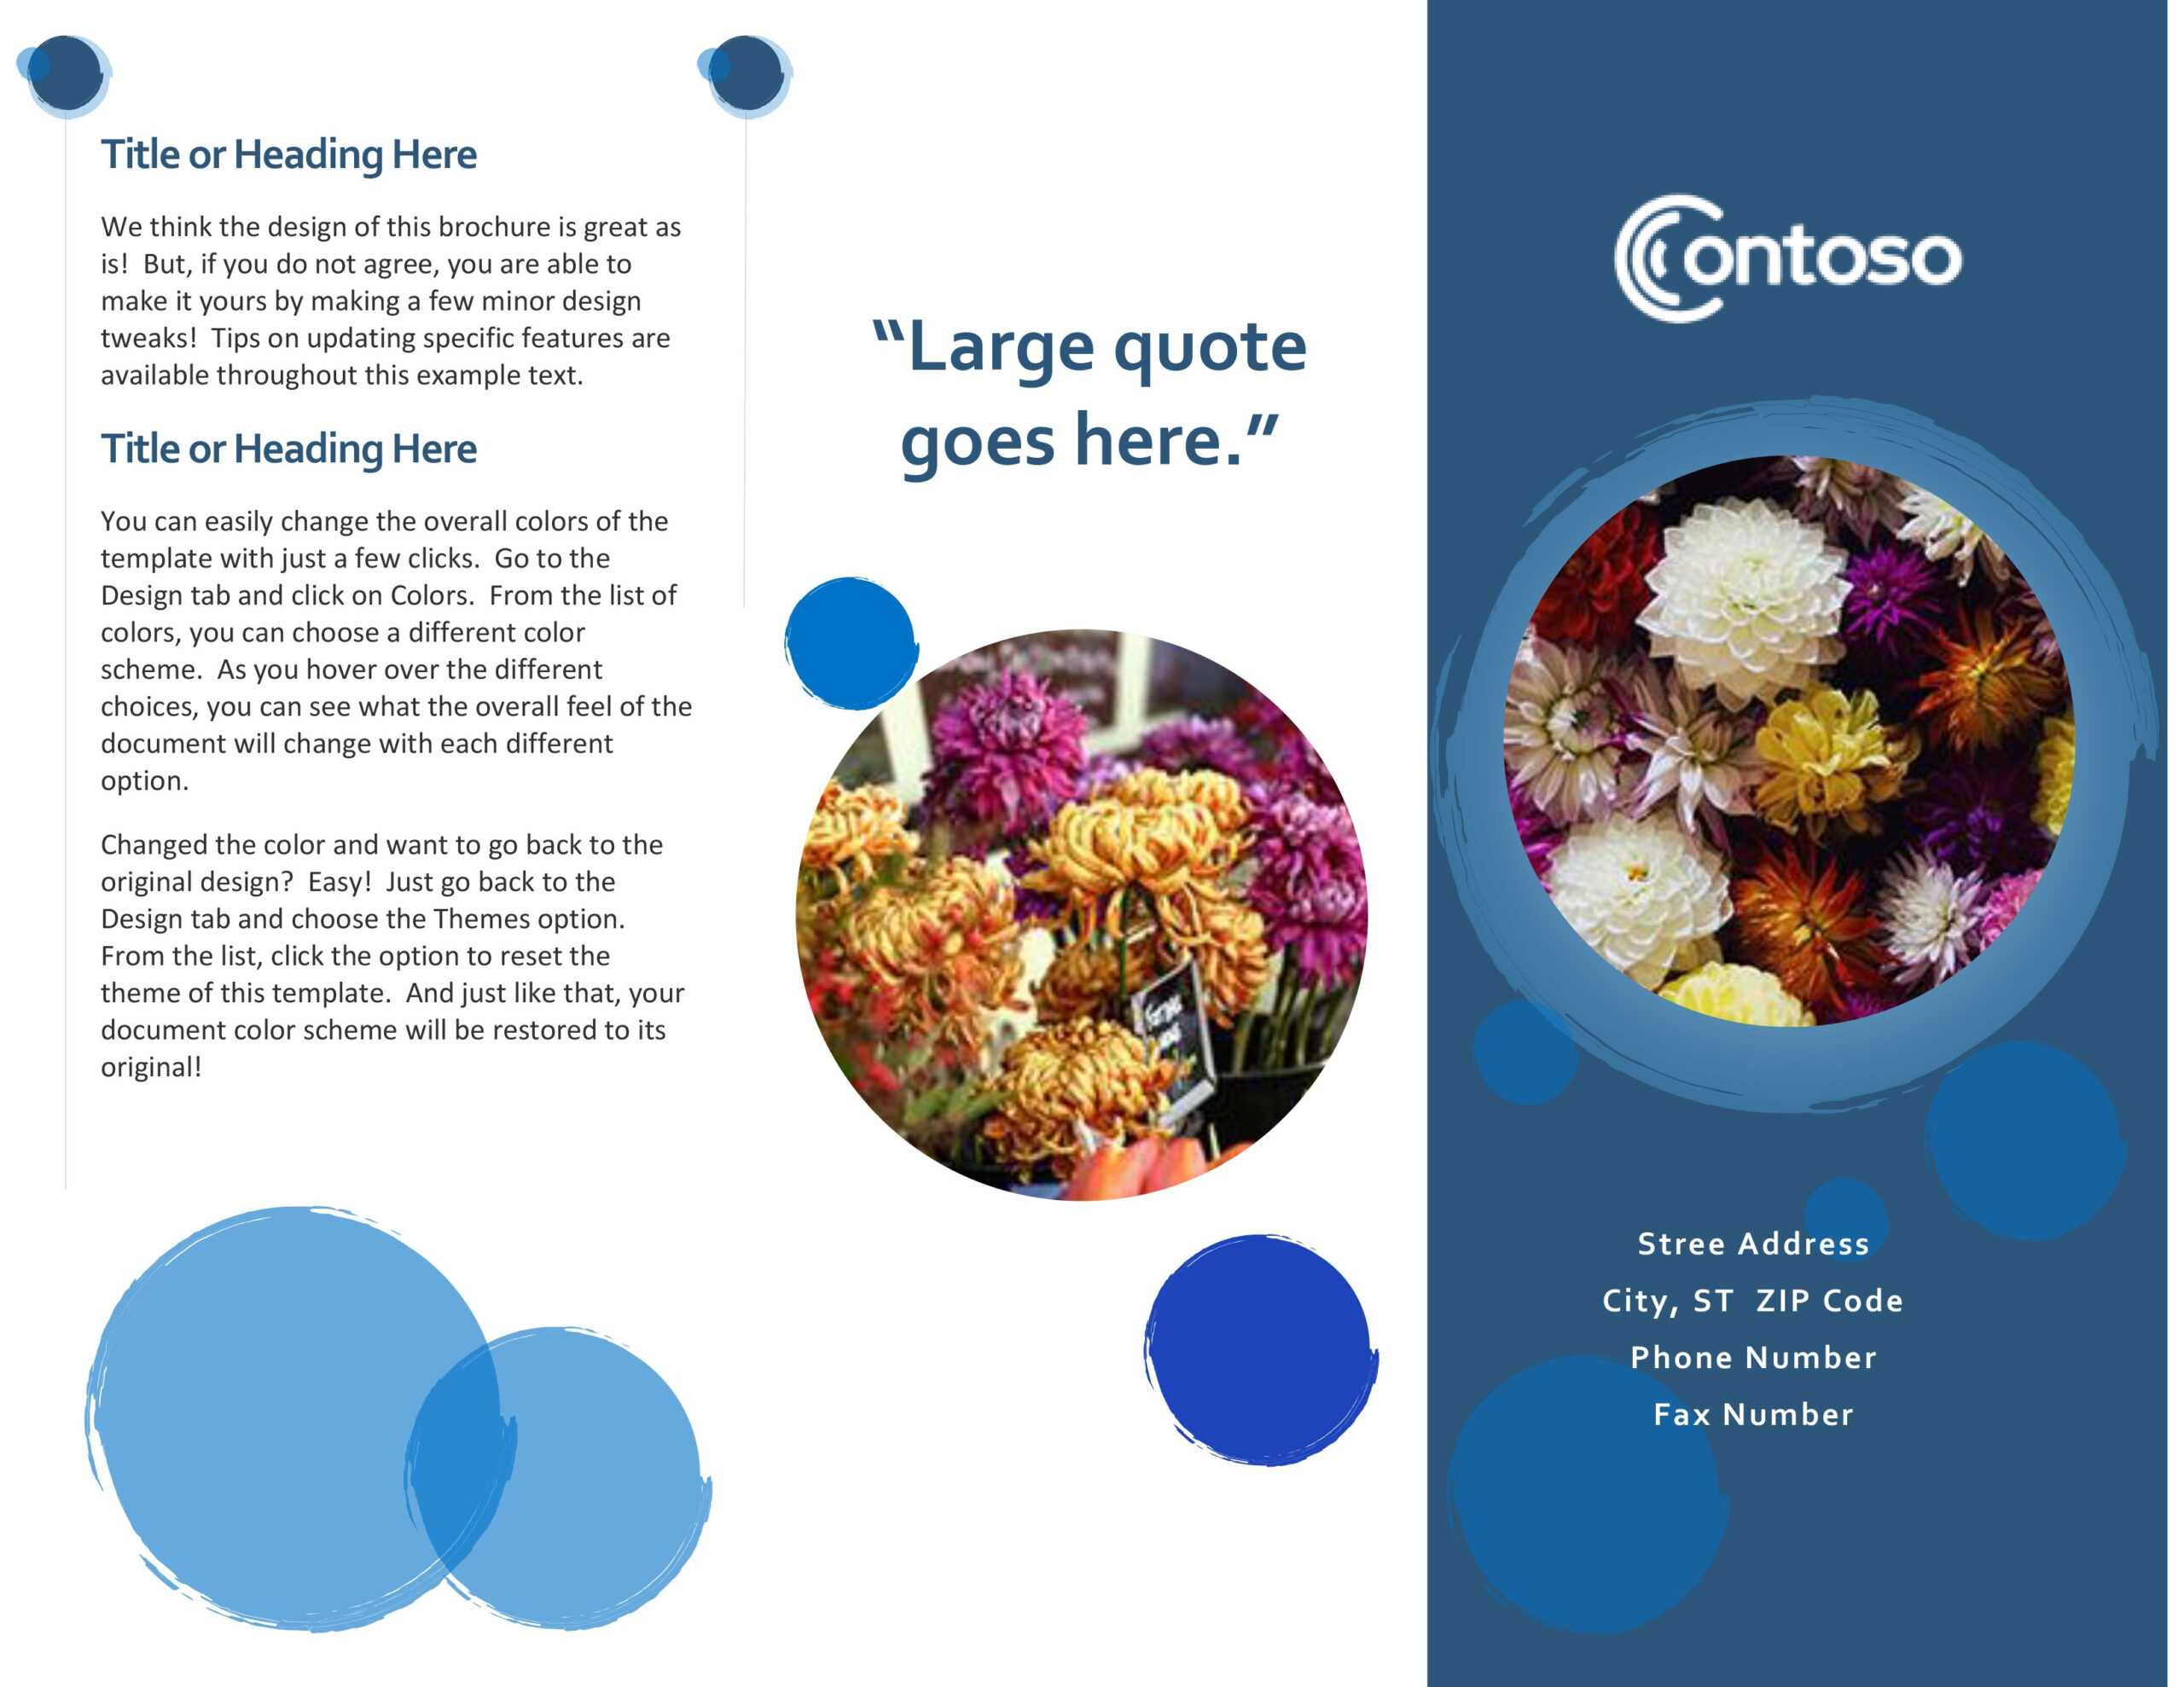 Free Template For Brochure Microsoft Office Throughout Free Template For Brochure Microsoft Office